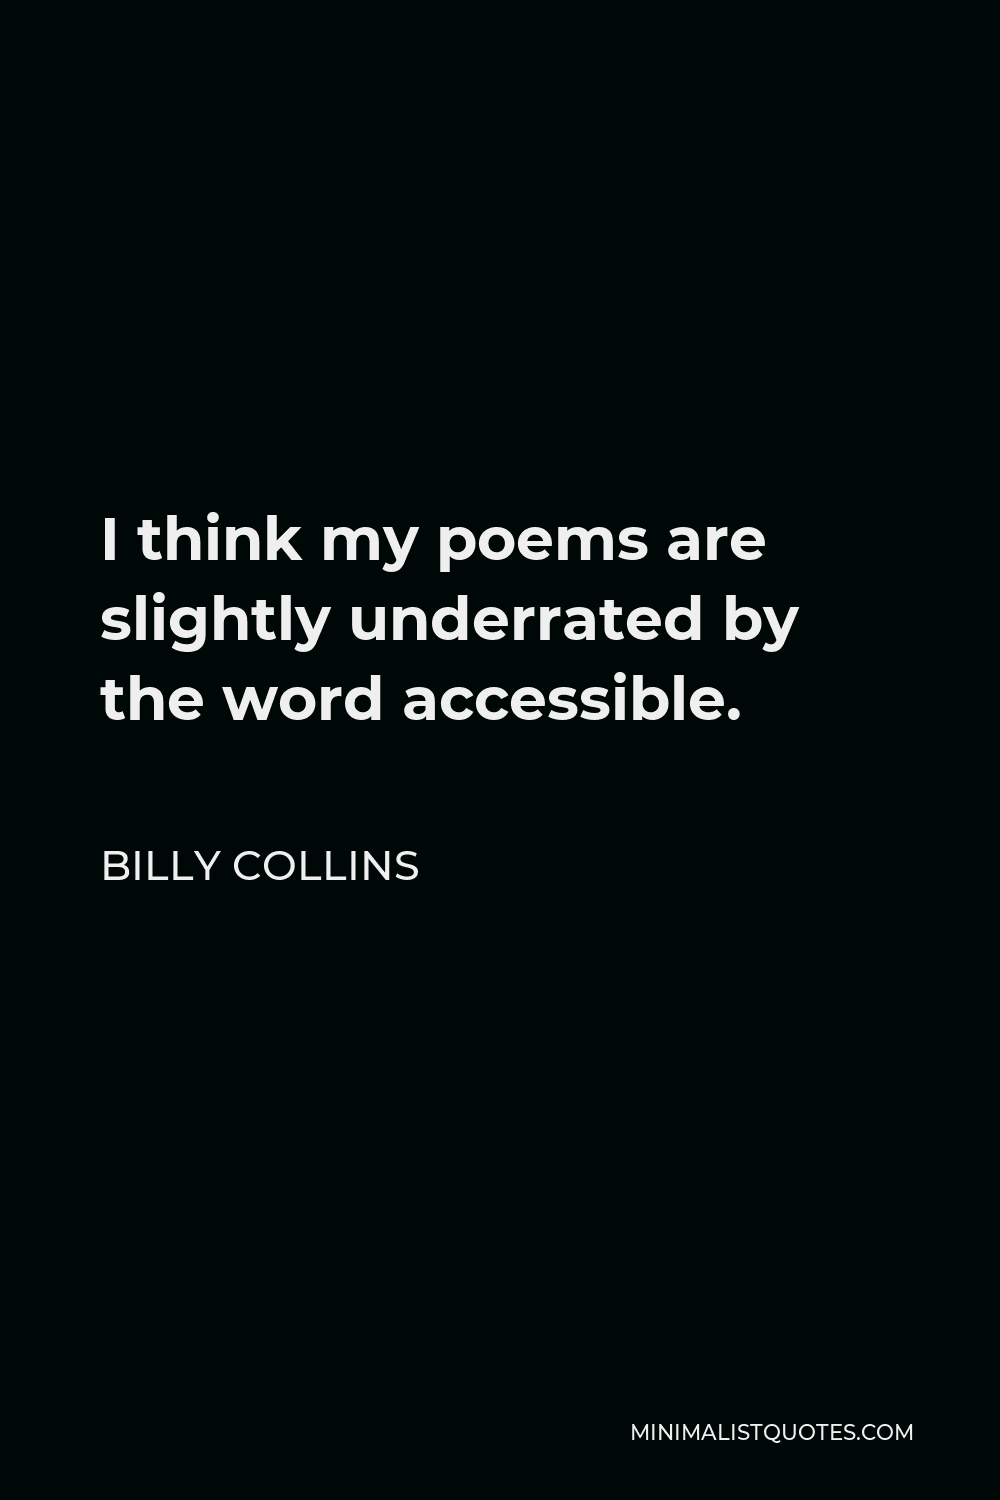 Billy Collins Quote - I think my poems are slightly underrated by the word accessible.